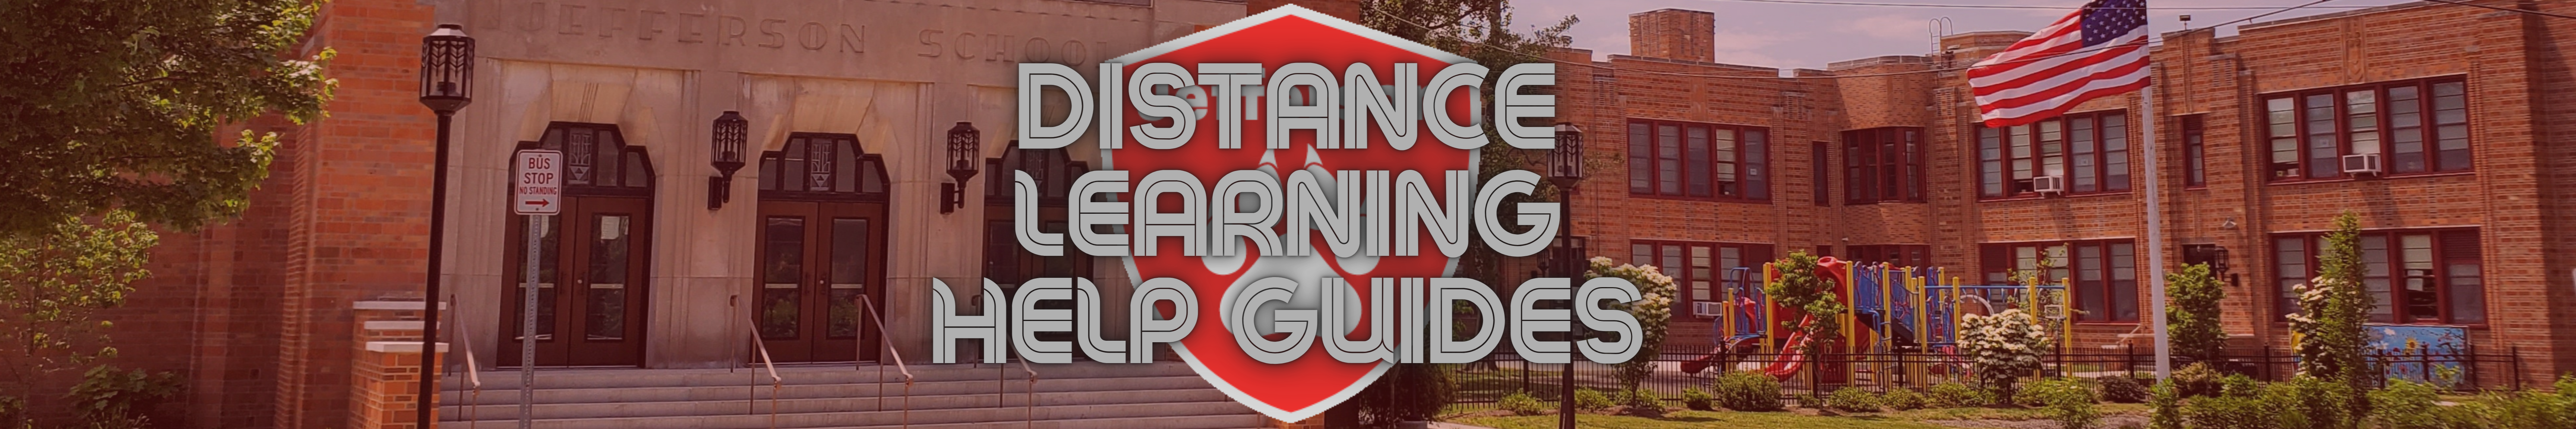 Distance Learning Help Guides banner